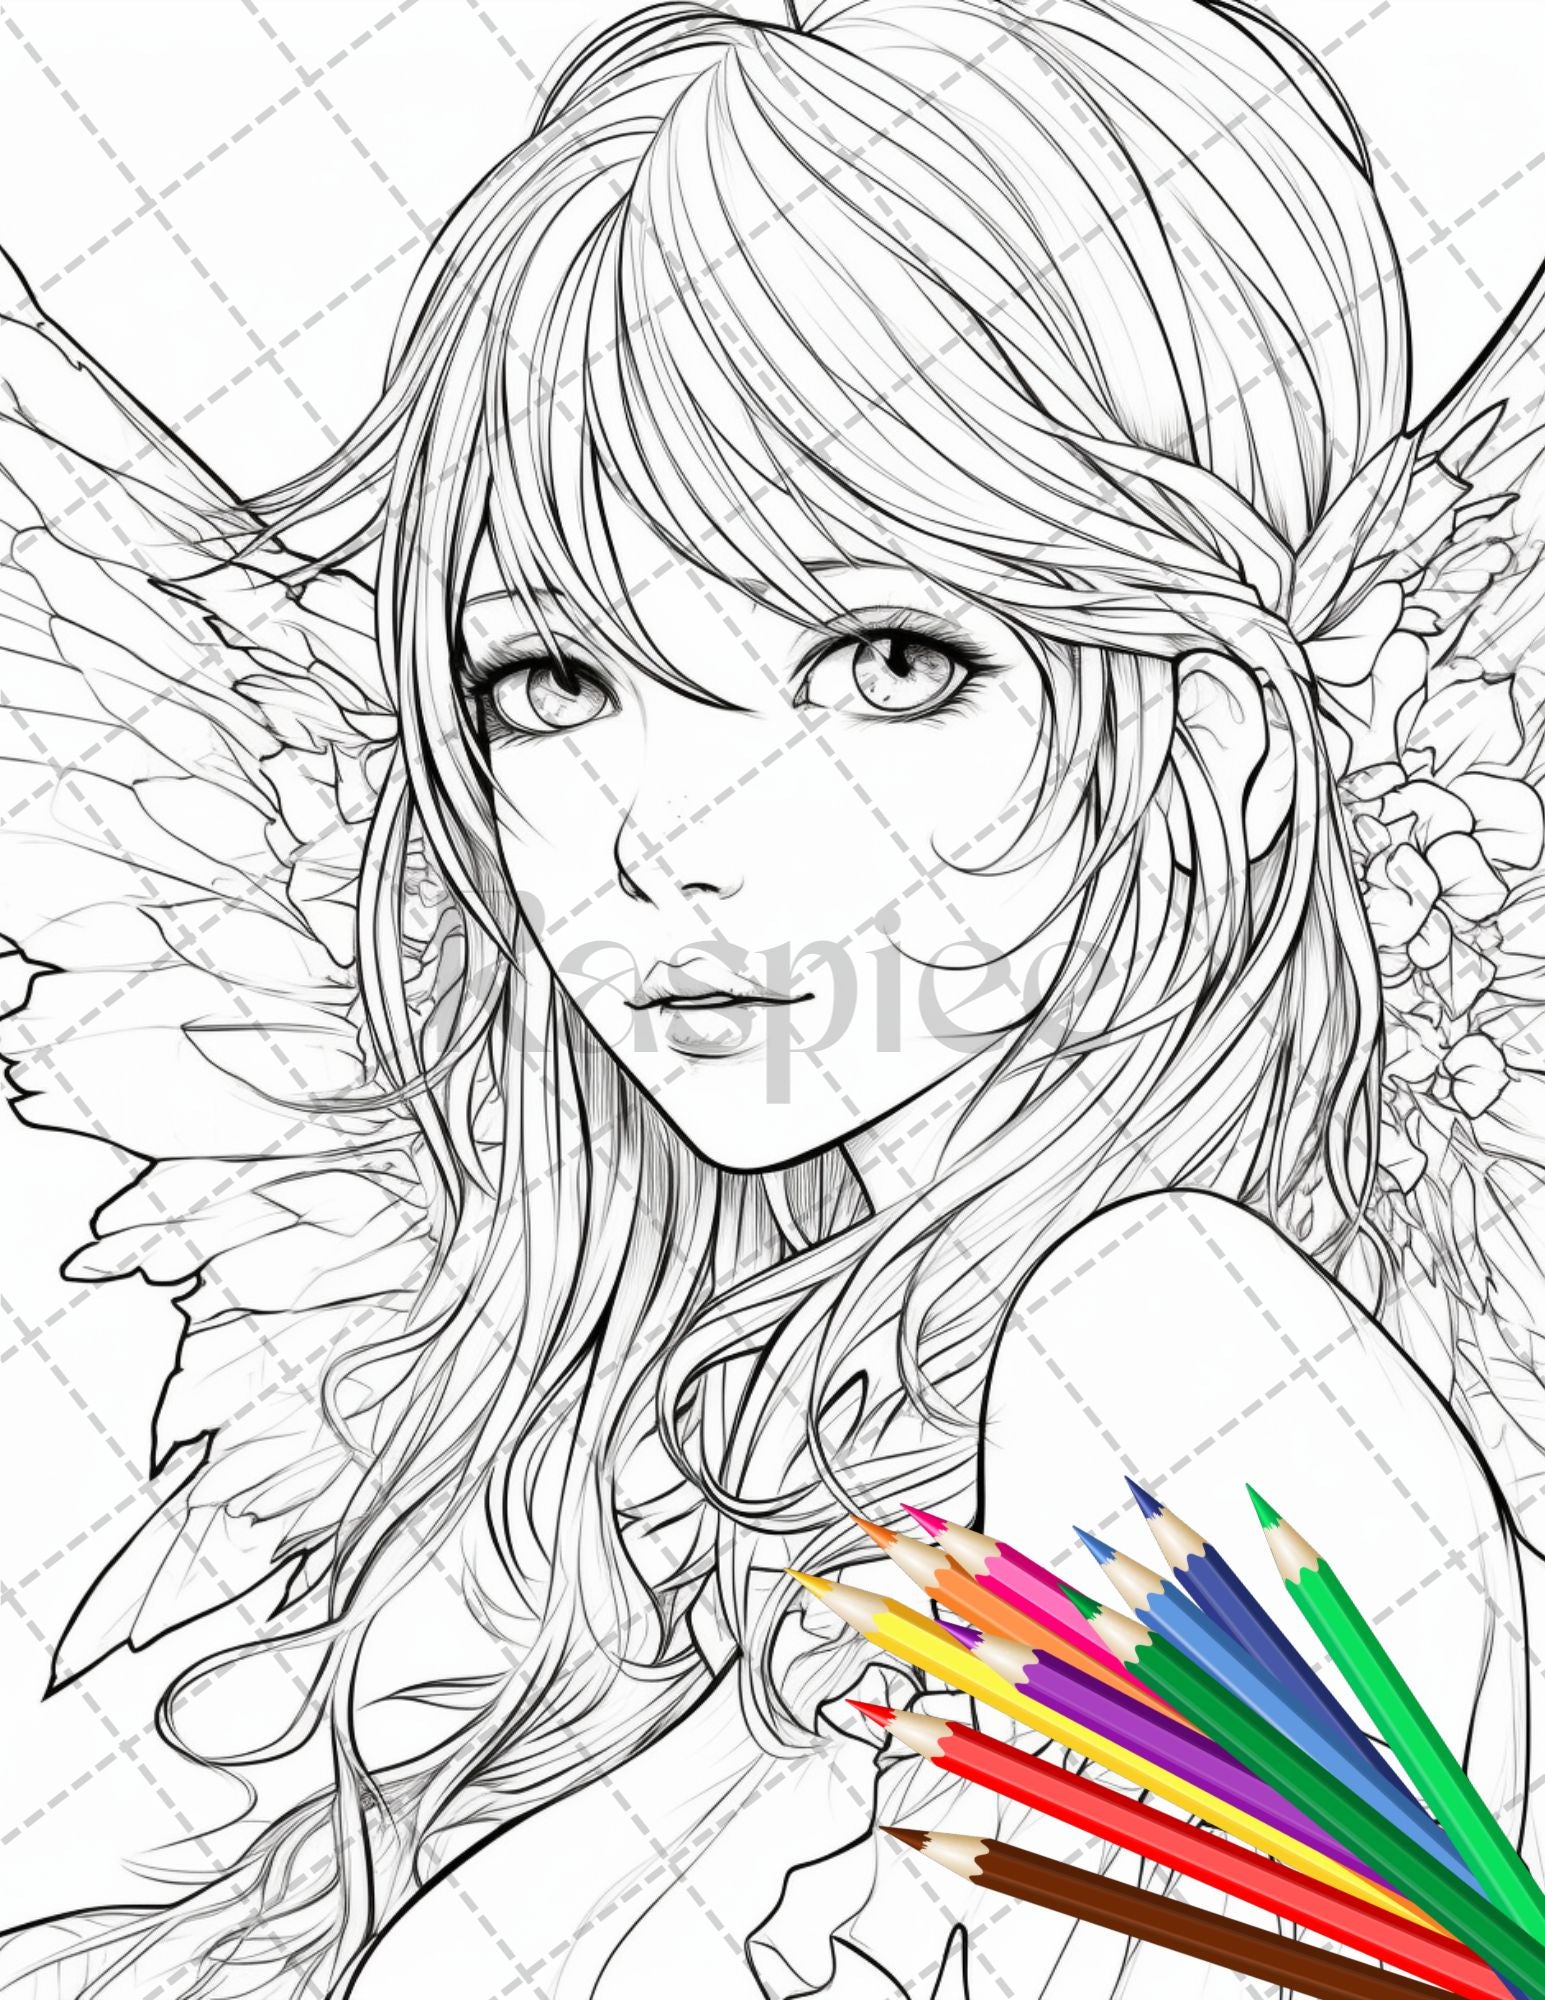 free printable hard fairy coloring pages